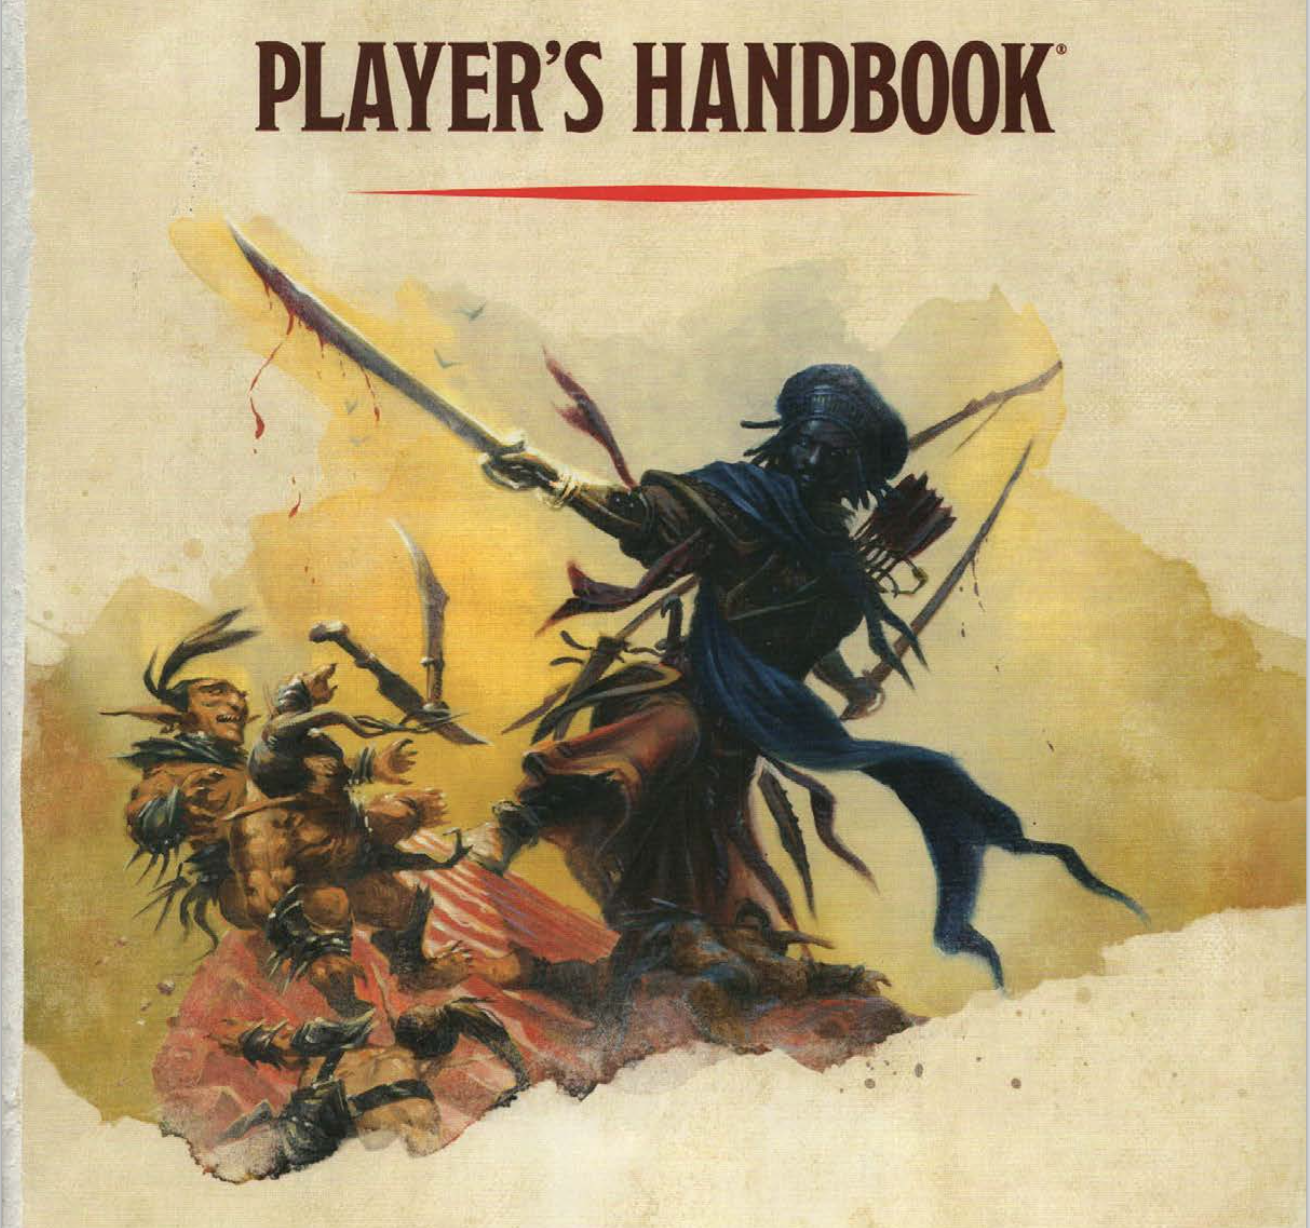 Dungeons and Dragons Player's Handbook. Players Handbook DND 5e. DND Player Handbook artwork. Player Handbook Cover Art. Player book